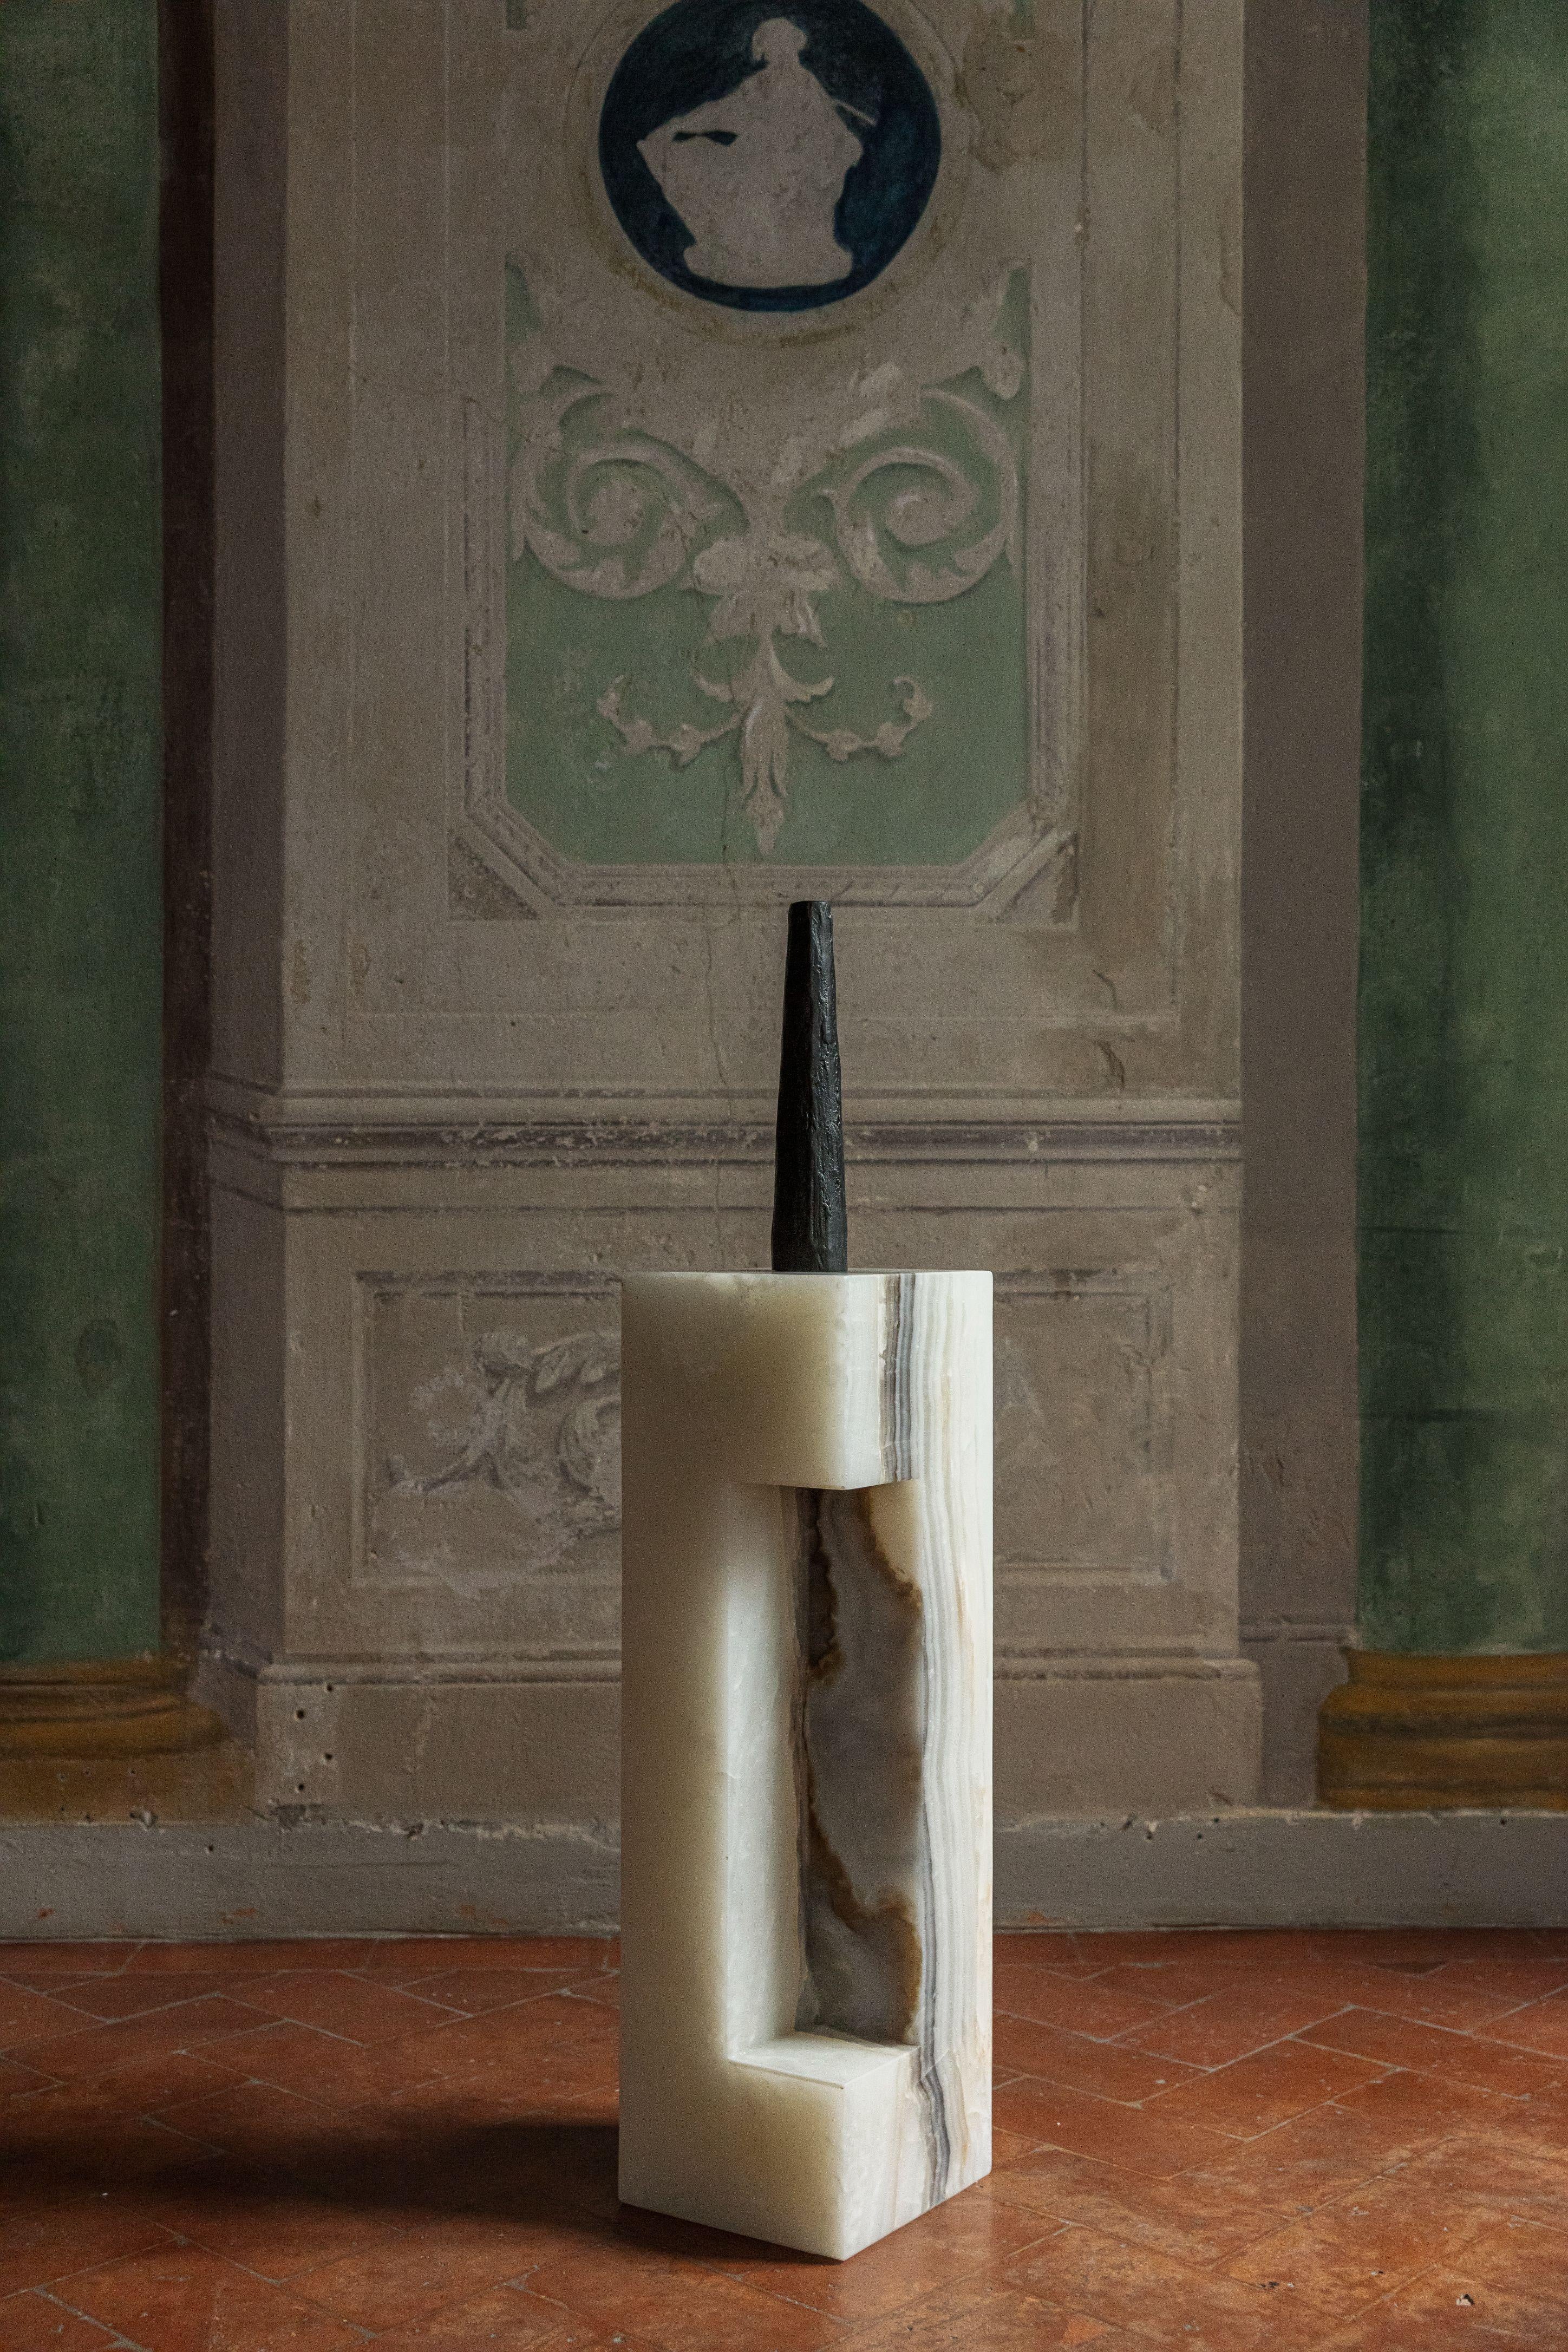 Grande candle pillar by Rick Owens
2015
Dimensions: L 7.5 x W 7.5 x H 41 cm
Materials: Bronze
Weight: 3.4 kg

Available in Black finish or Nitrate (Dark Brown) finish, please contact us.

Rick Owens is a California-born fashion and furniture has